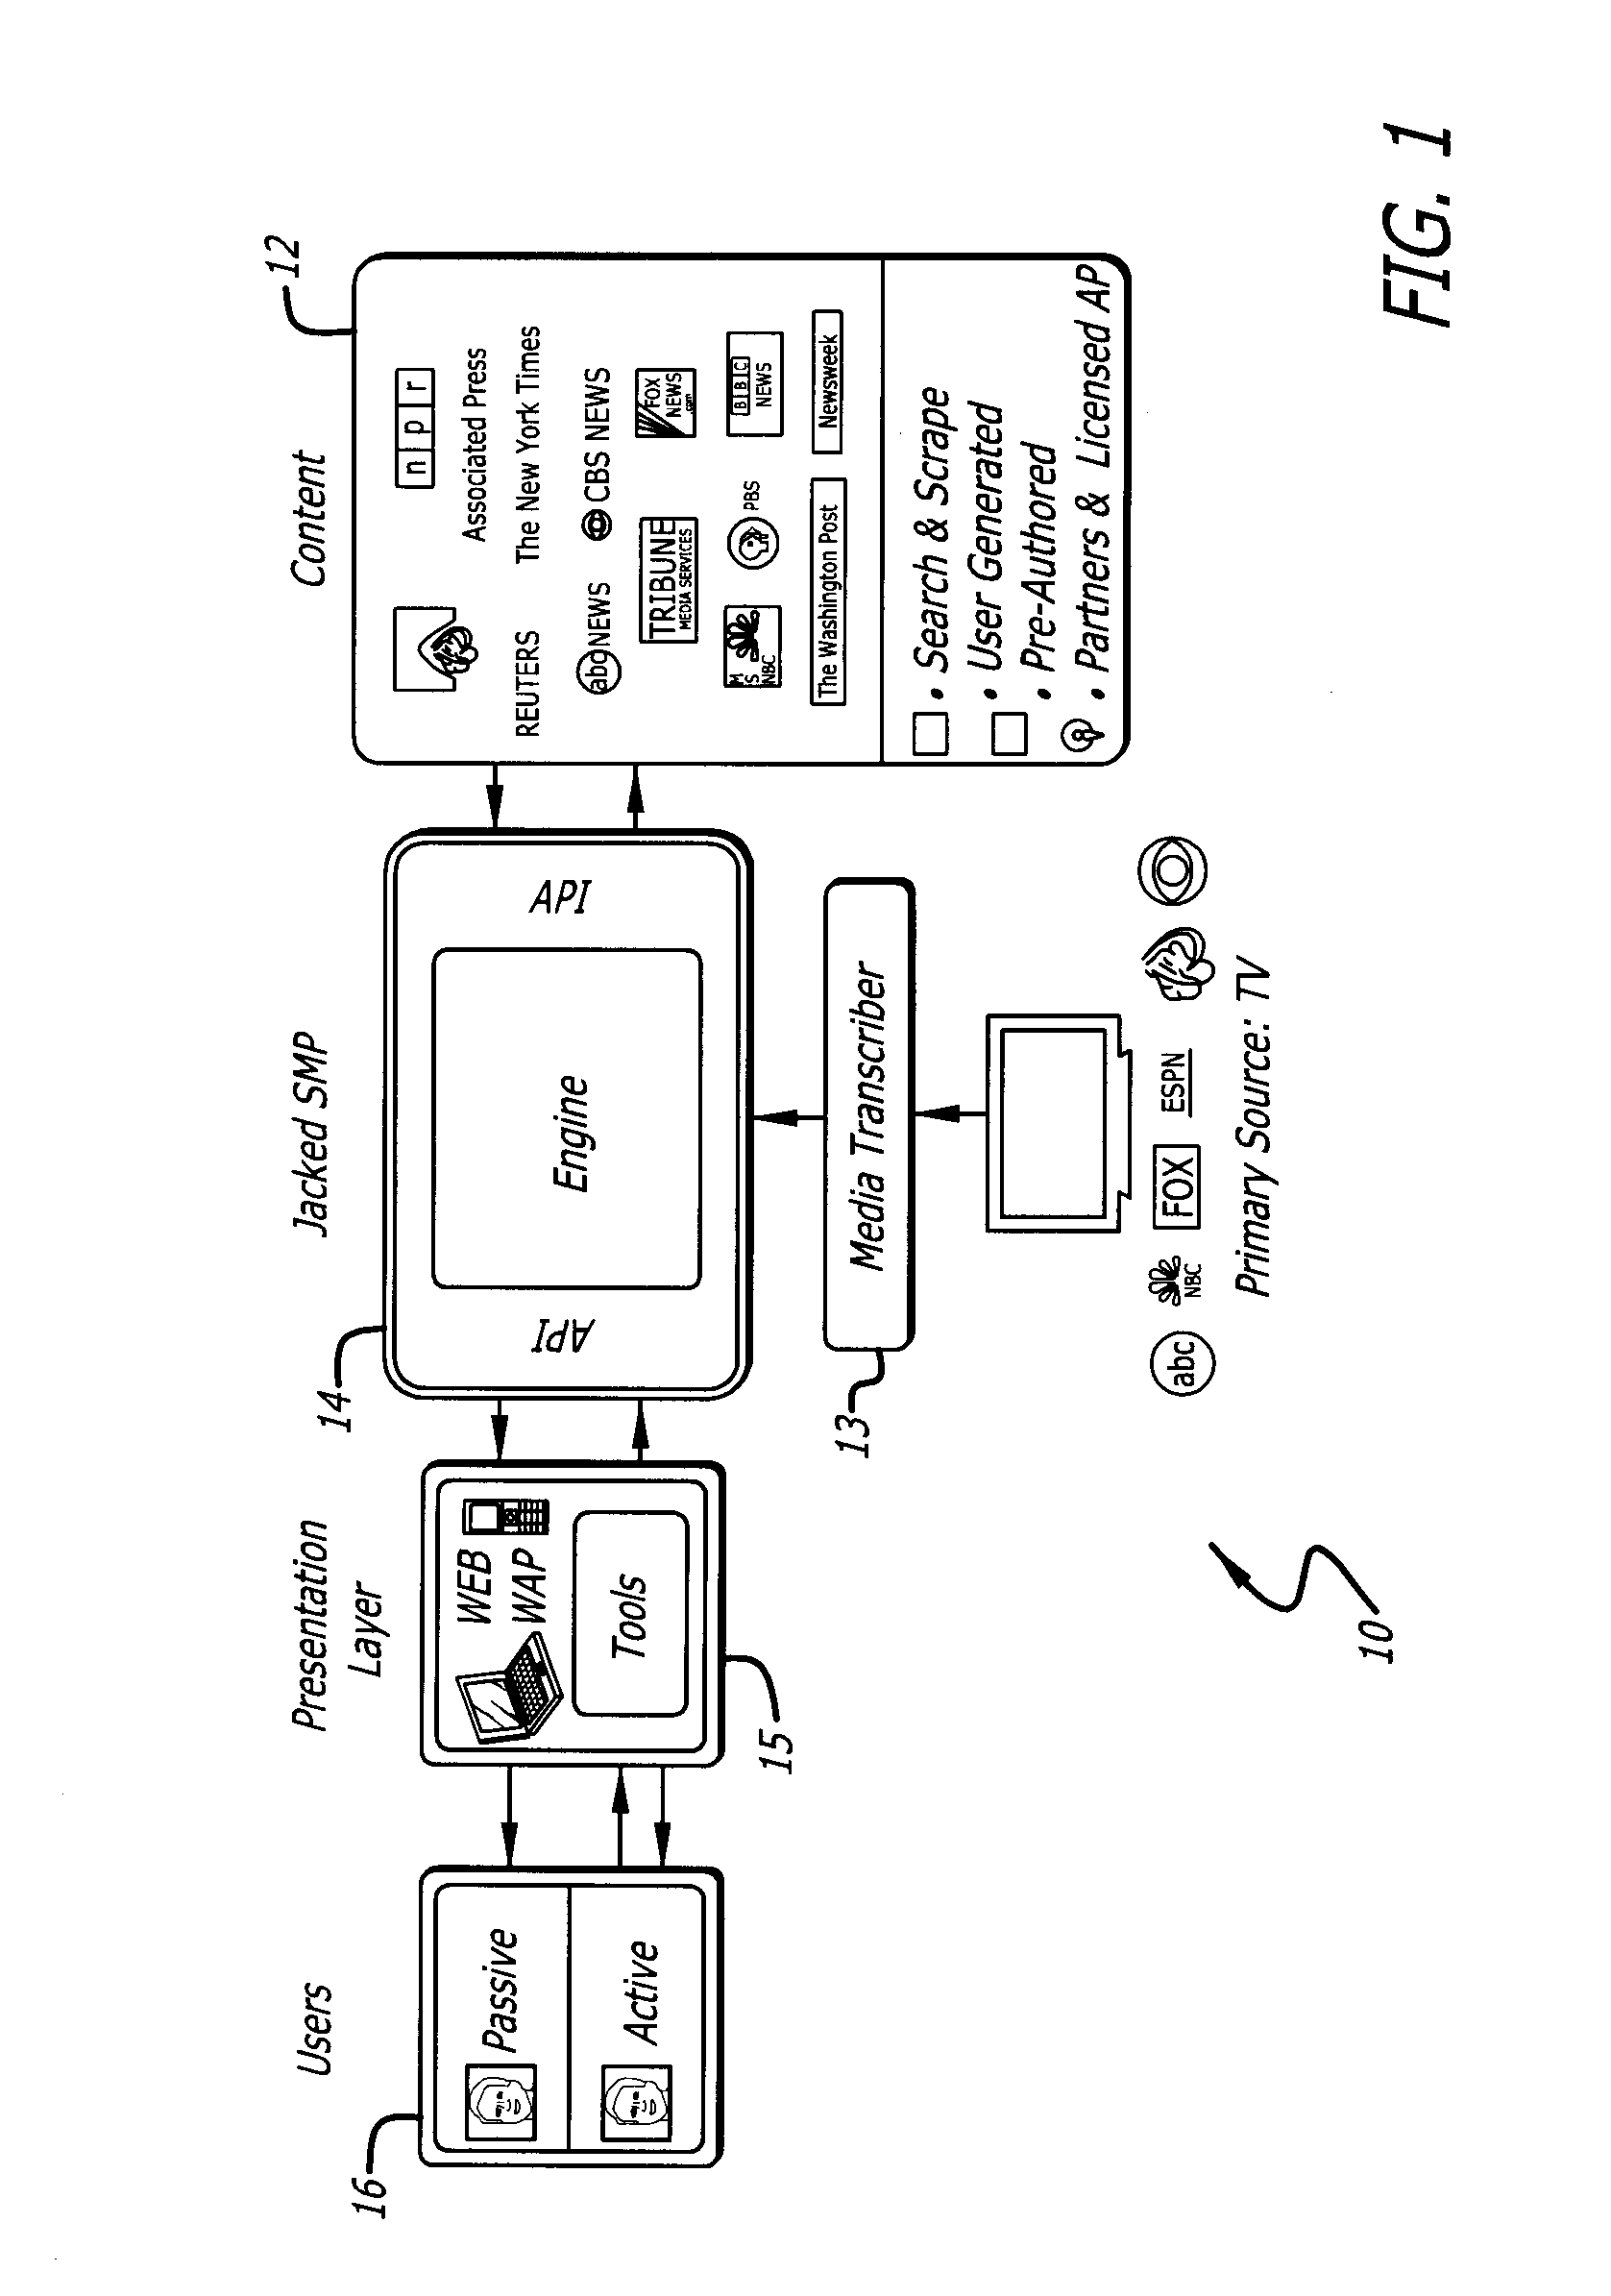 System for providing secondary content based on primary broadcast